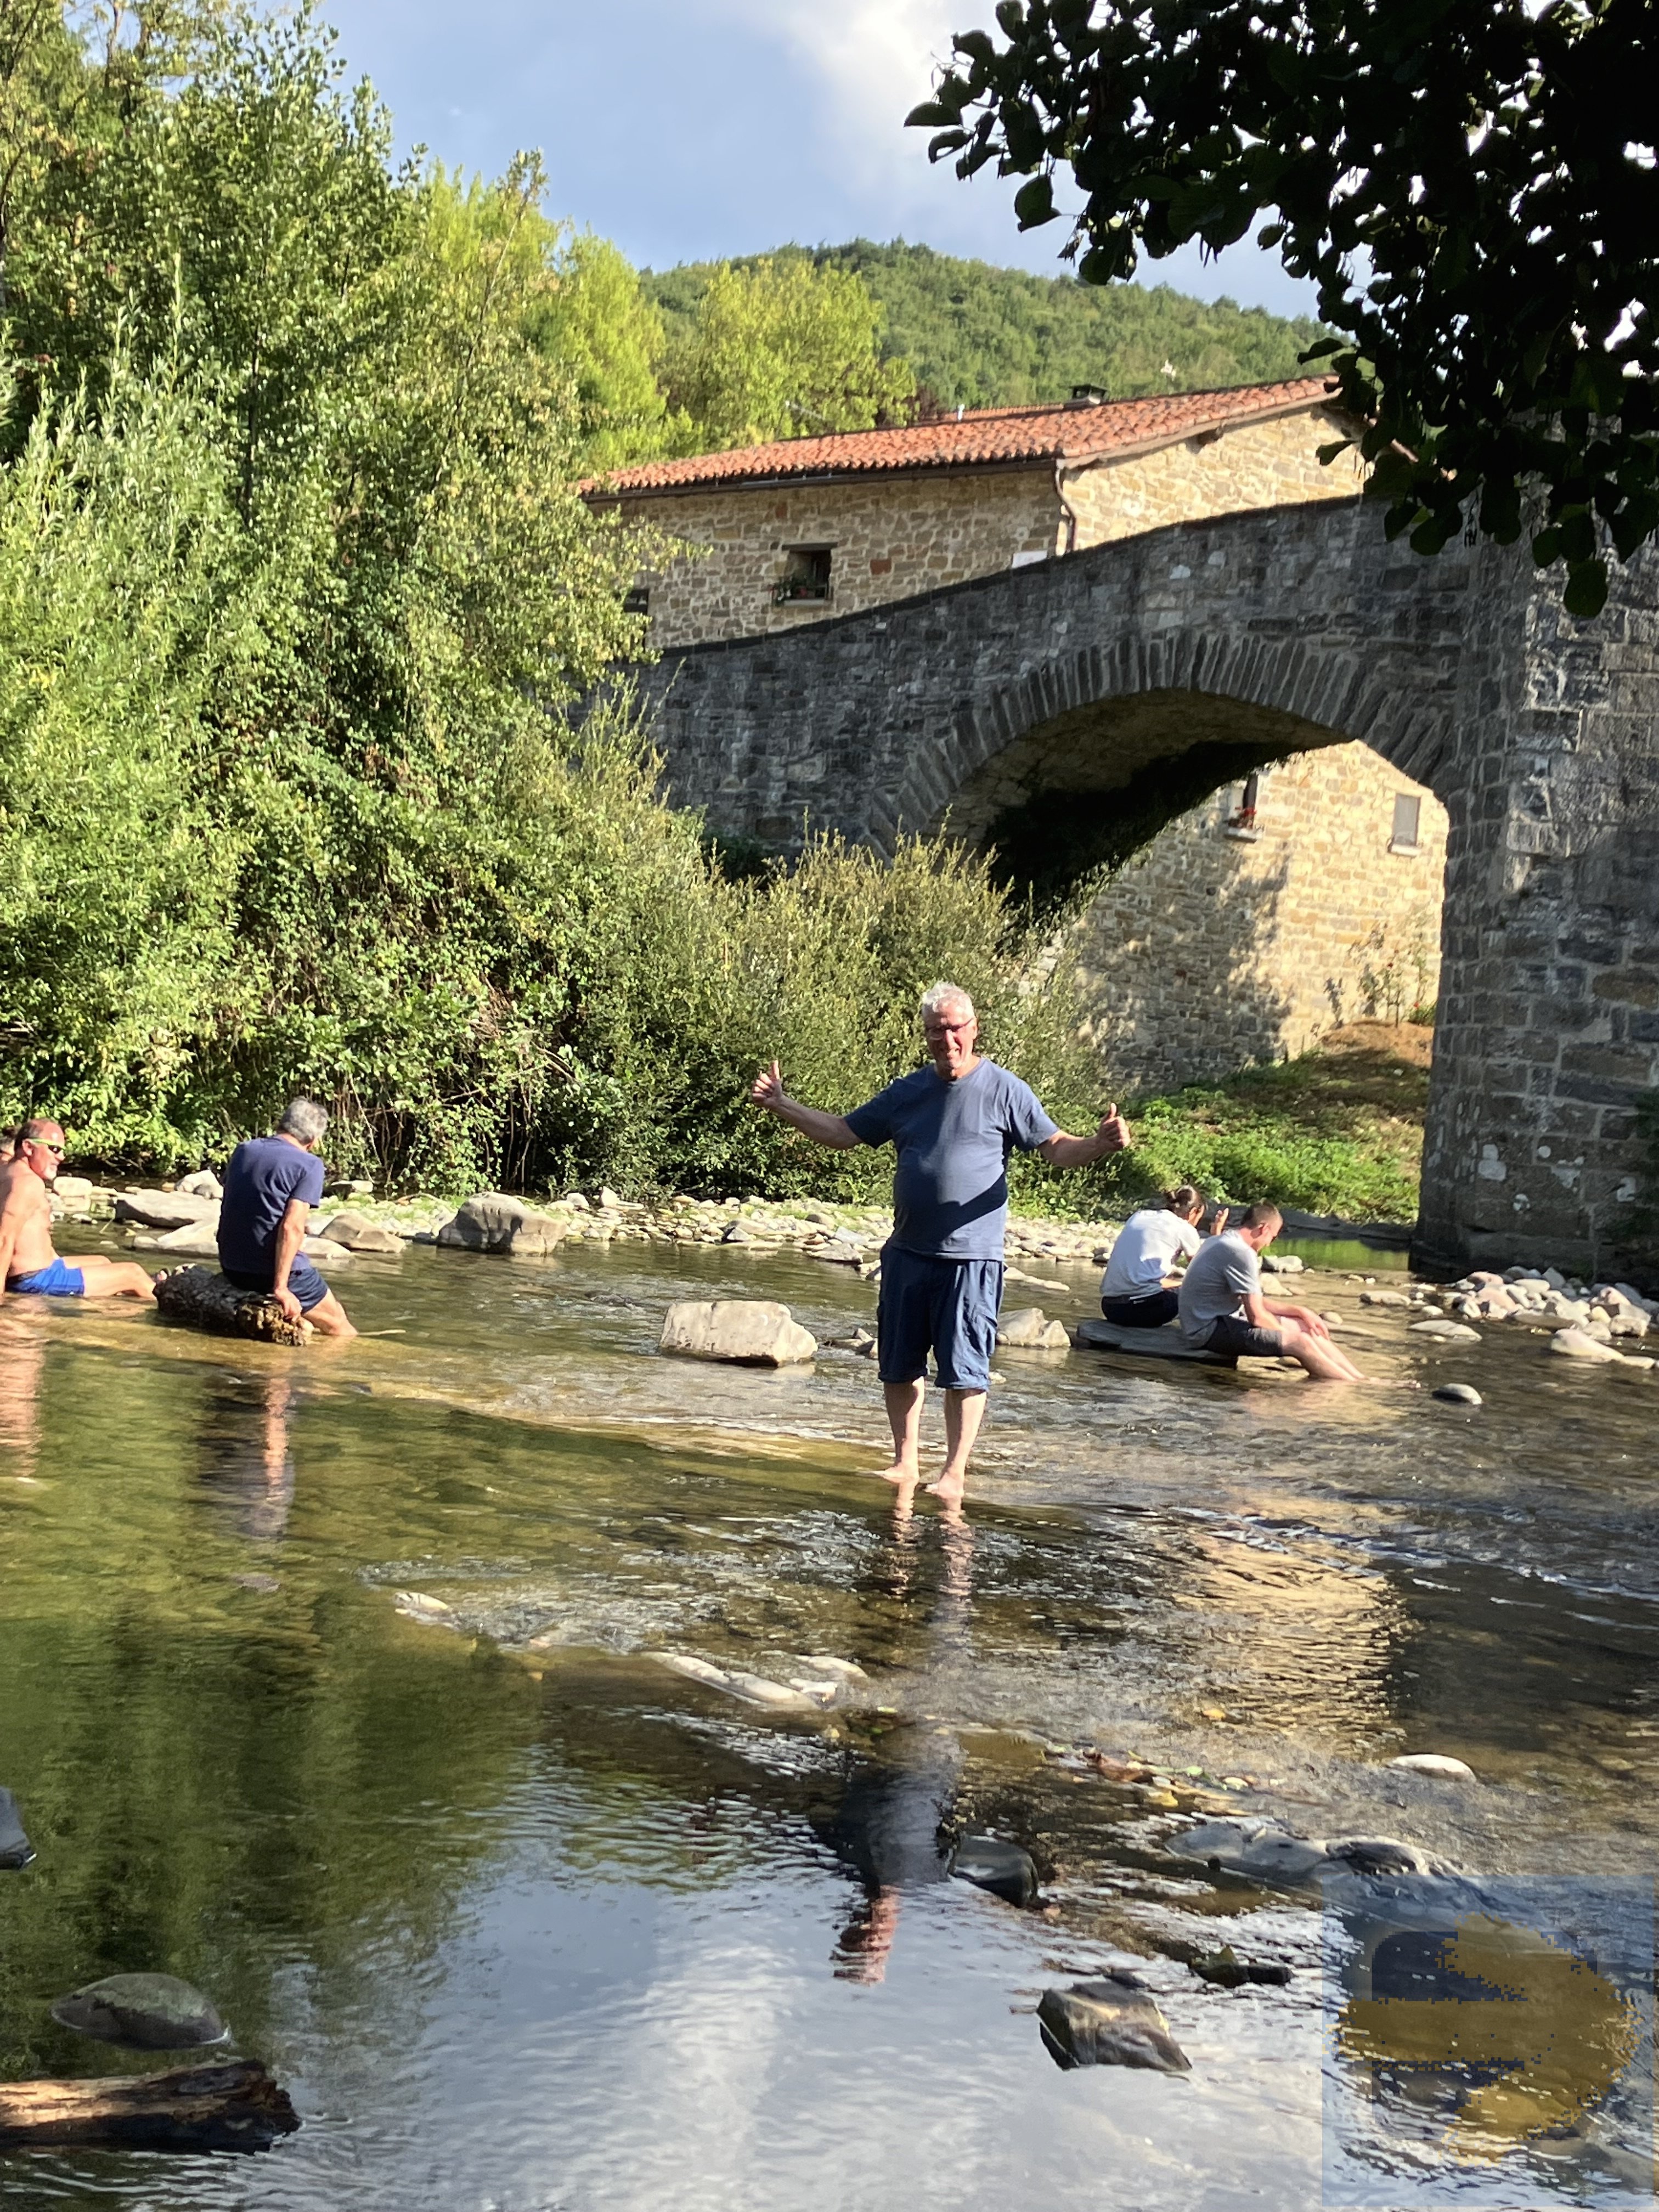 Playing in the River at Zubiri